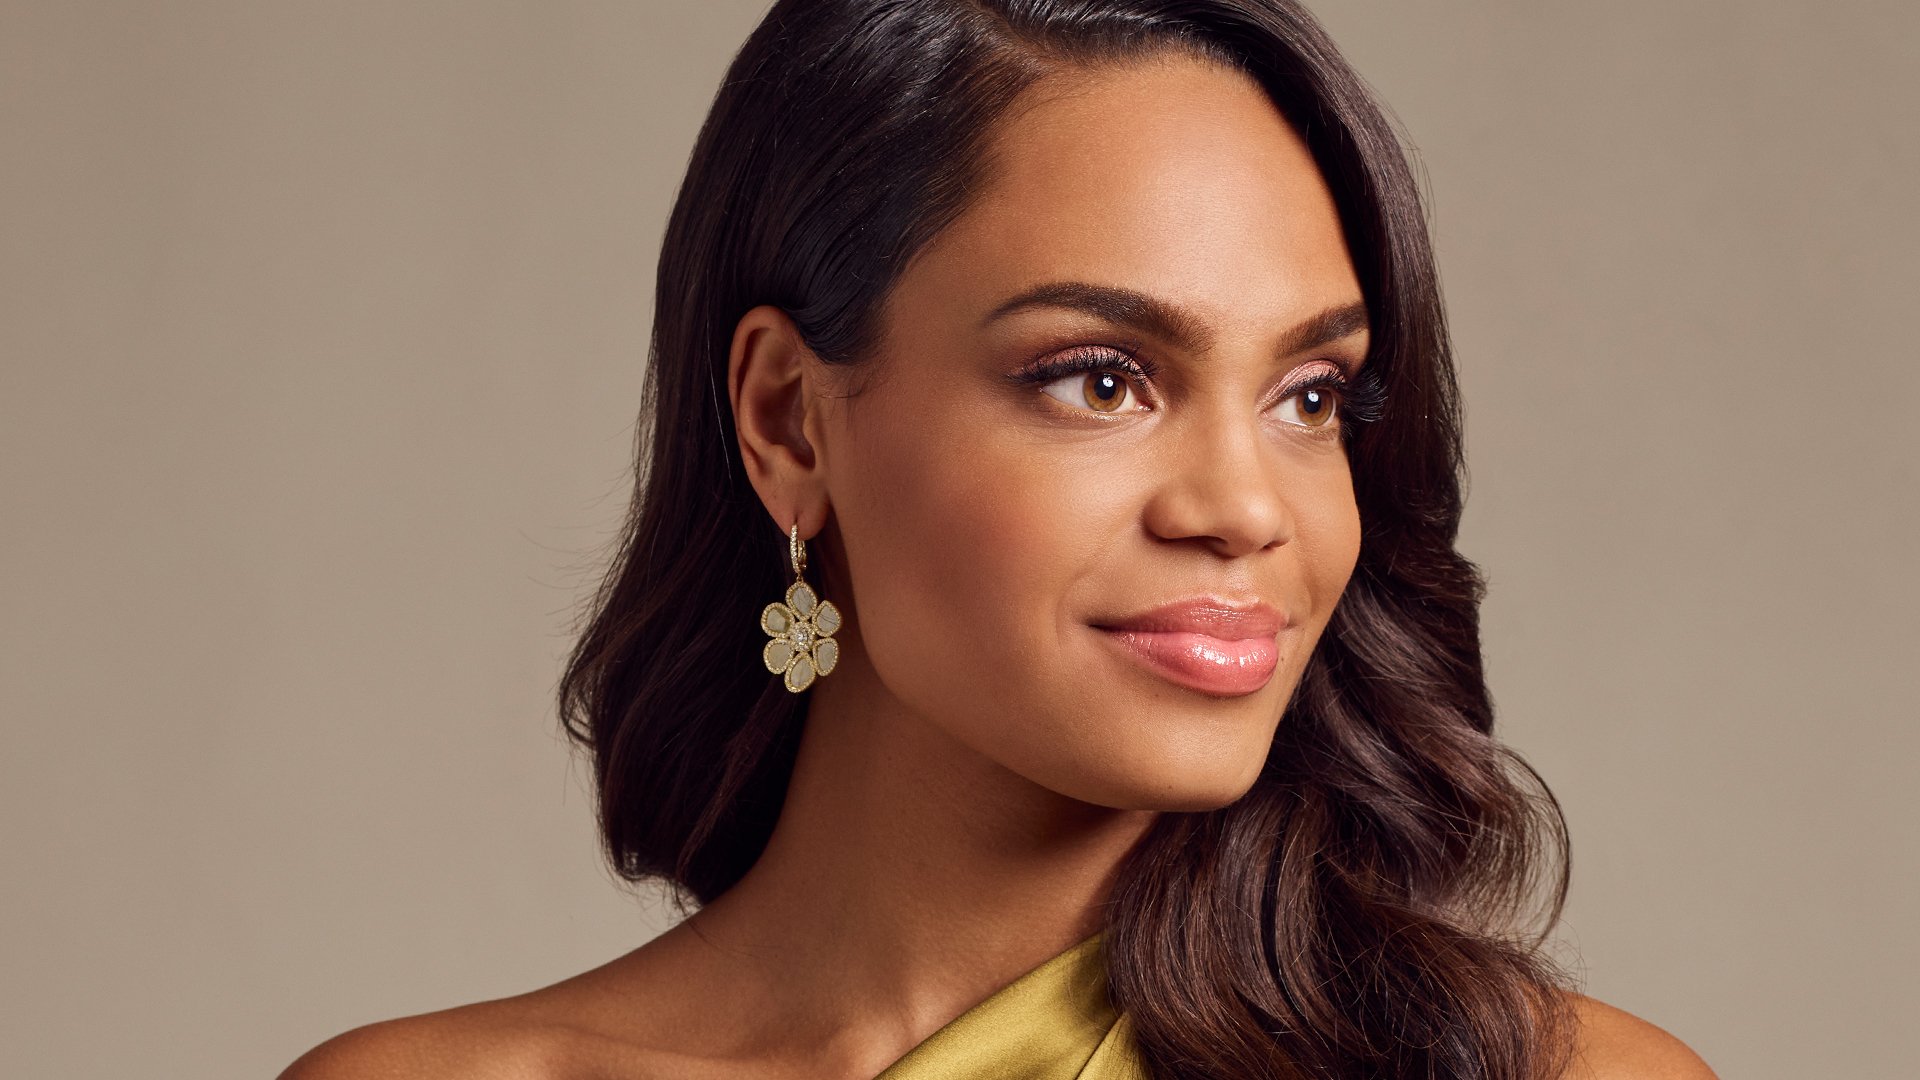 Headshot of Michelle Young for ‘The Bachelorette’ Season 18 (2021) promos